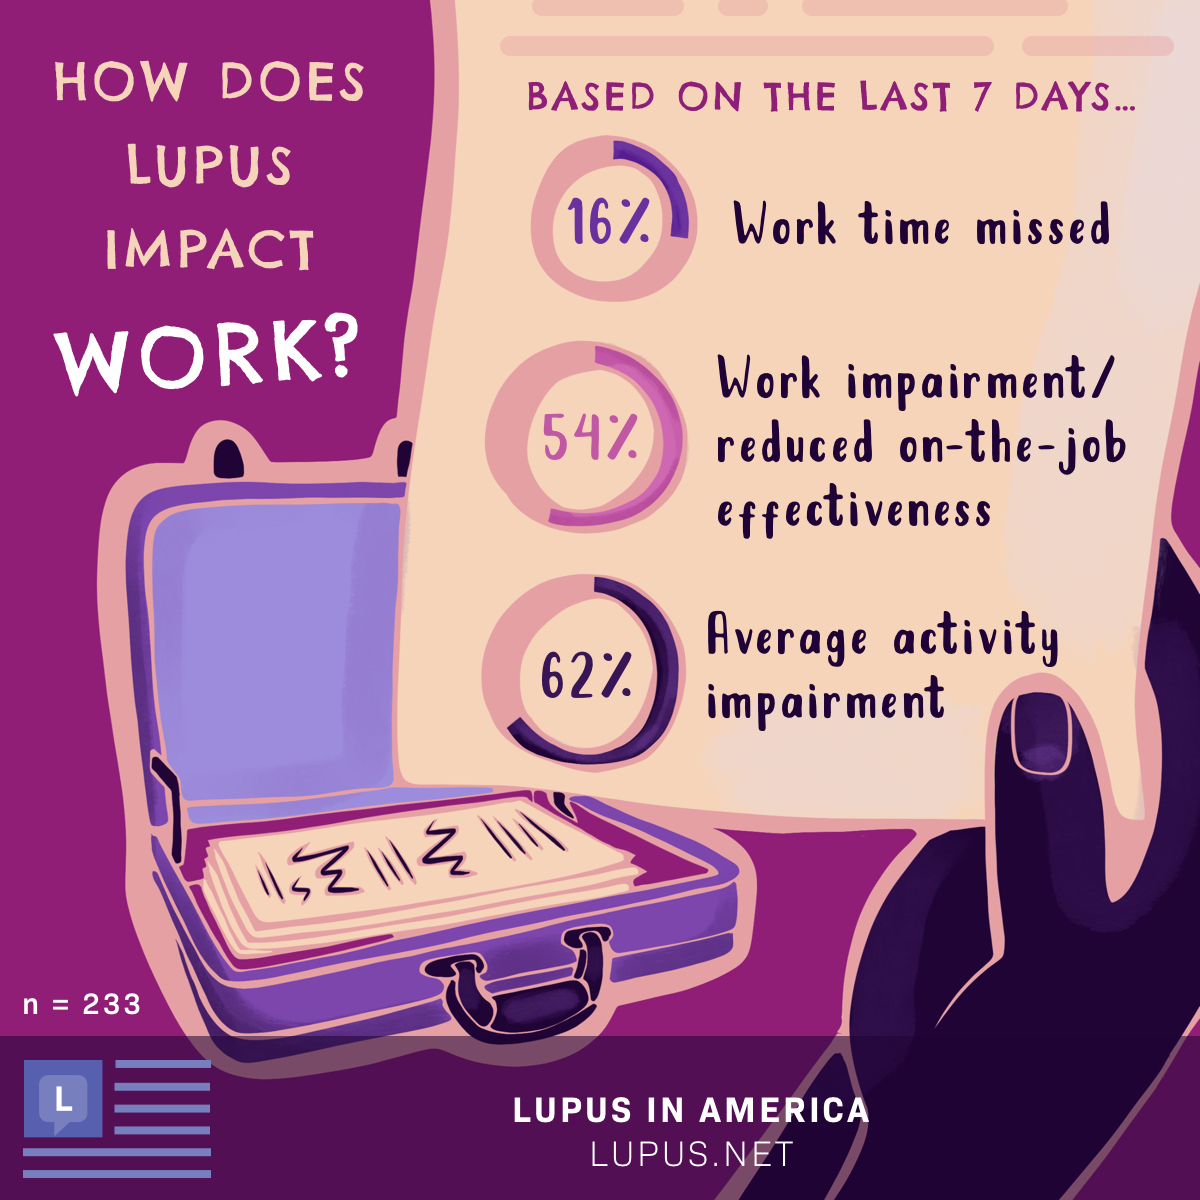 How lupus impacts work based on the last 7 days, including 16% work time missed, 54% impairment/reduced on-the-job effectiveness, and 62% average activity impairment. Imagery includes a hand holding a piece of paper and a briefcase of papers.